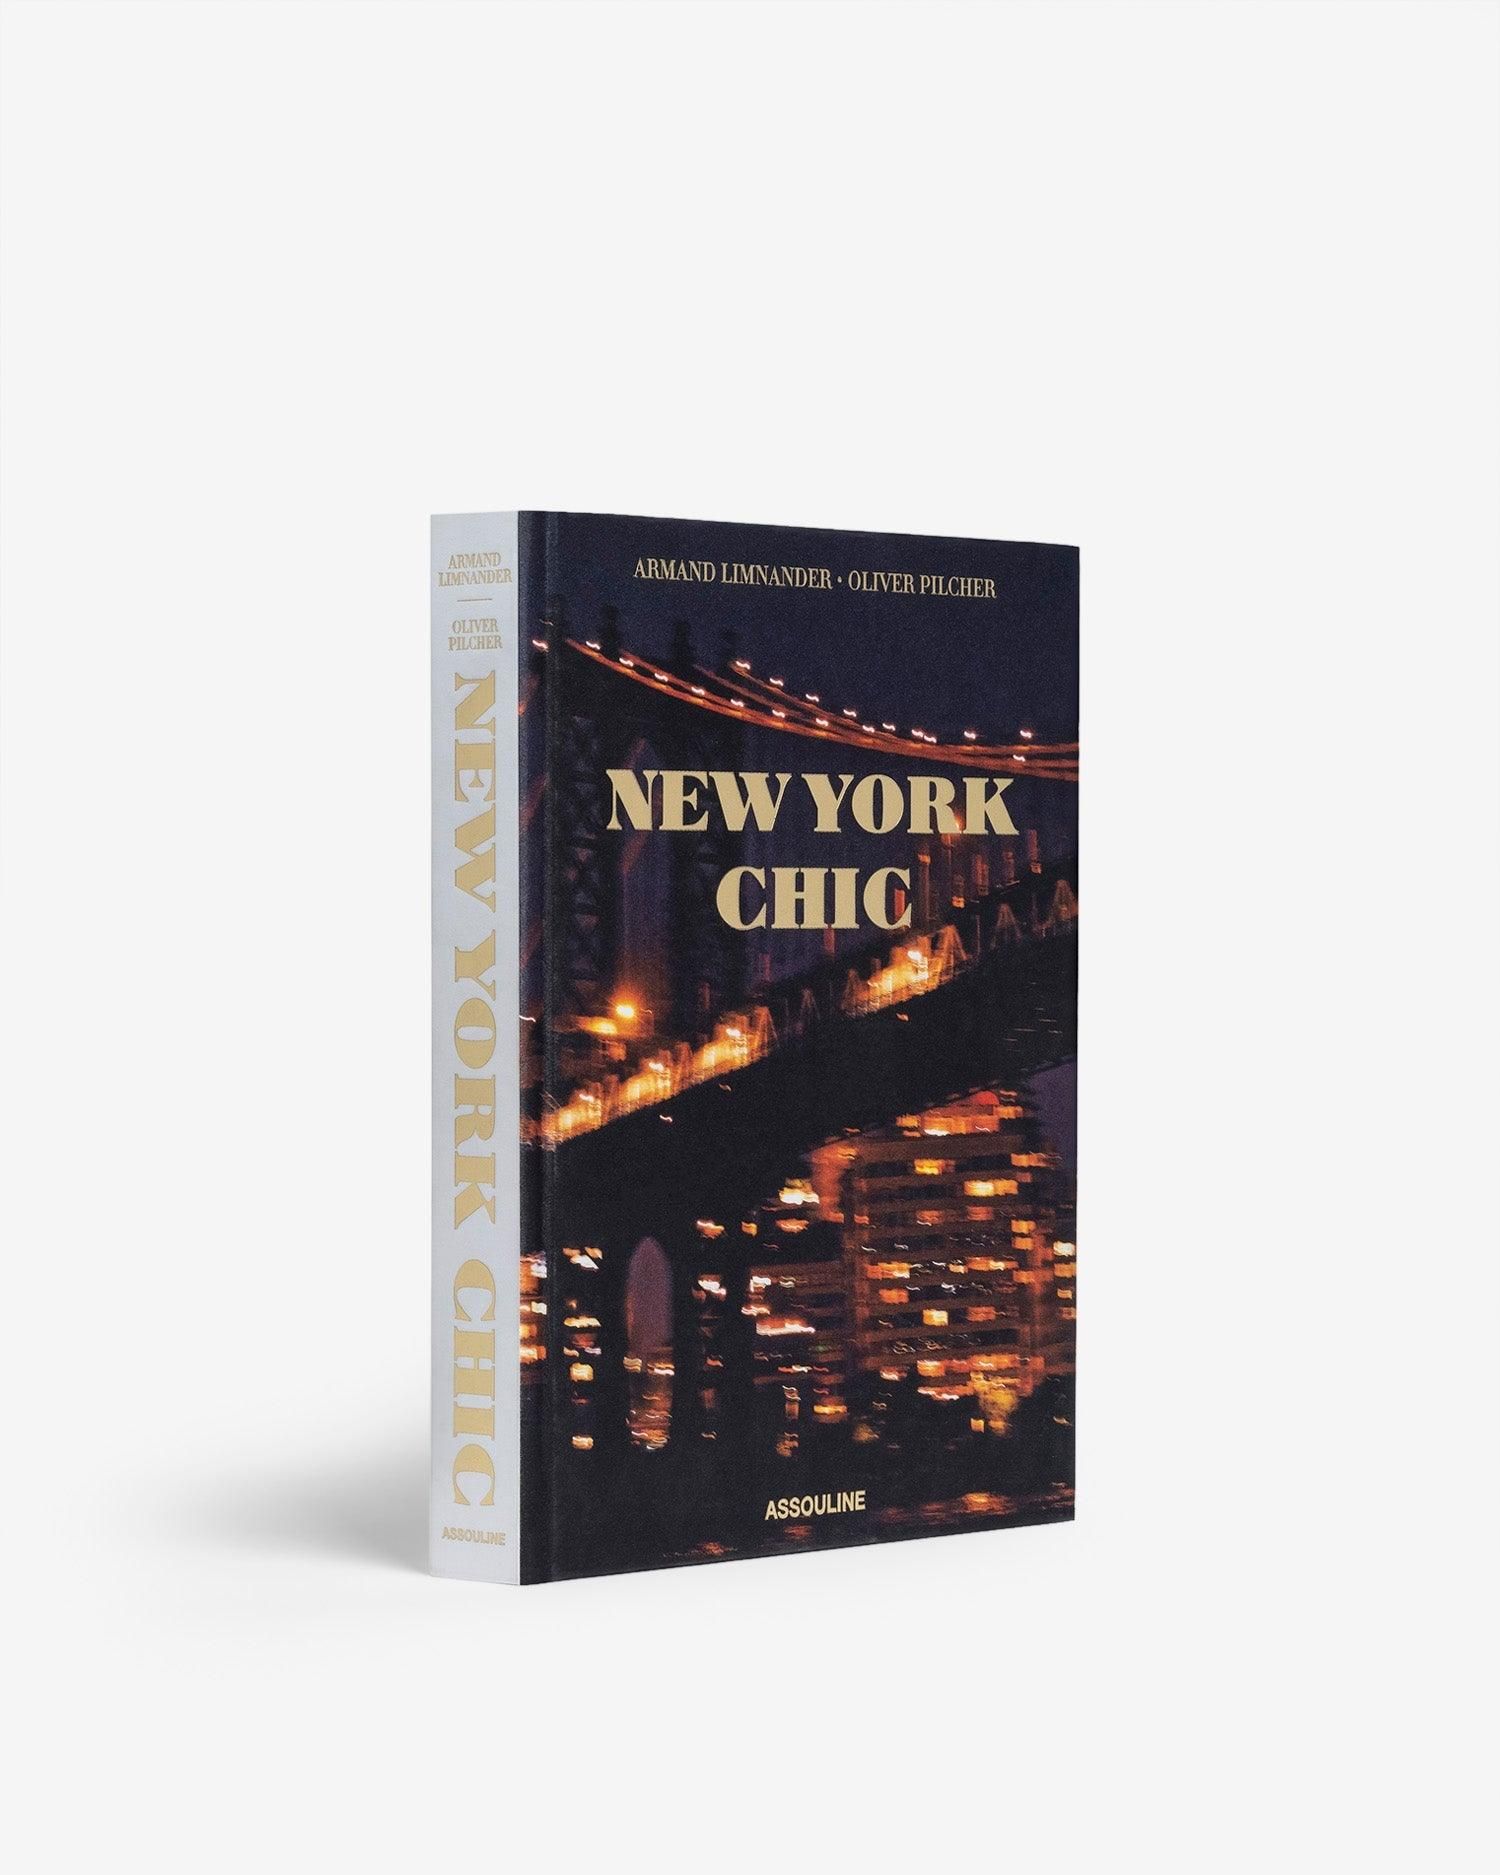 New York Chic by Armand Limnander - Coffee Table Book | ASSOULINE | Assouline